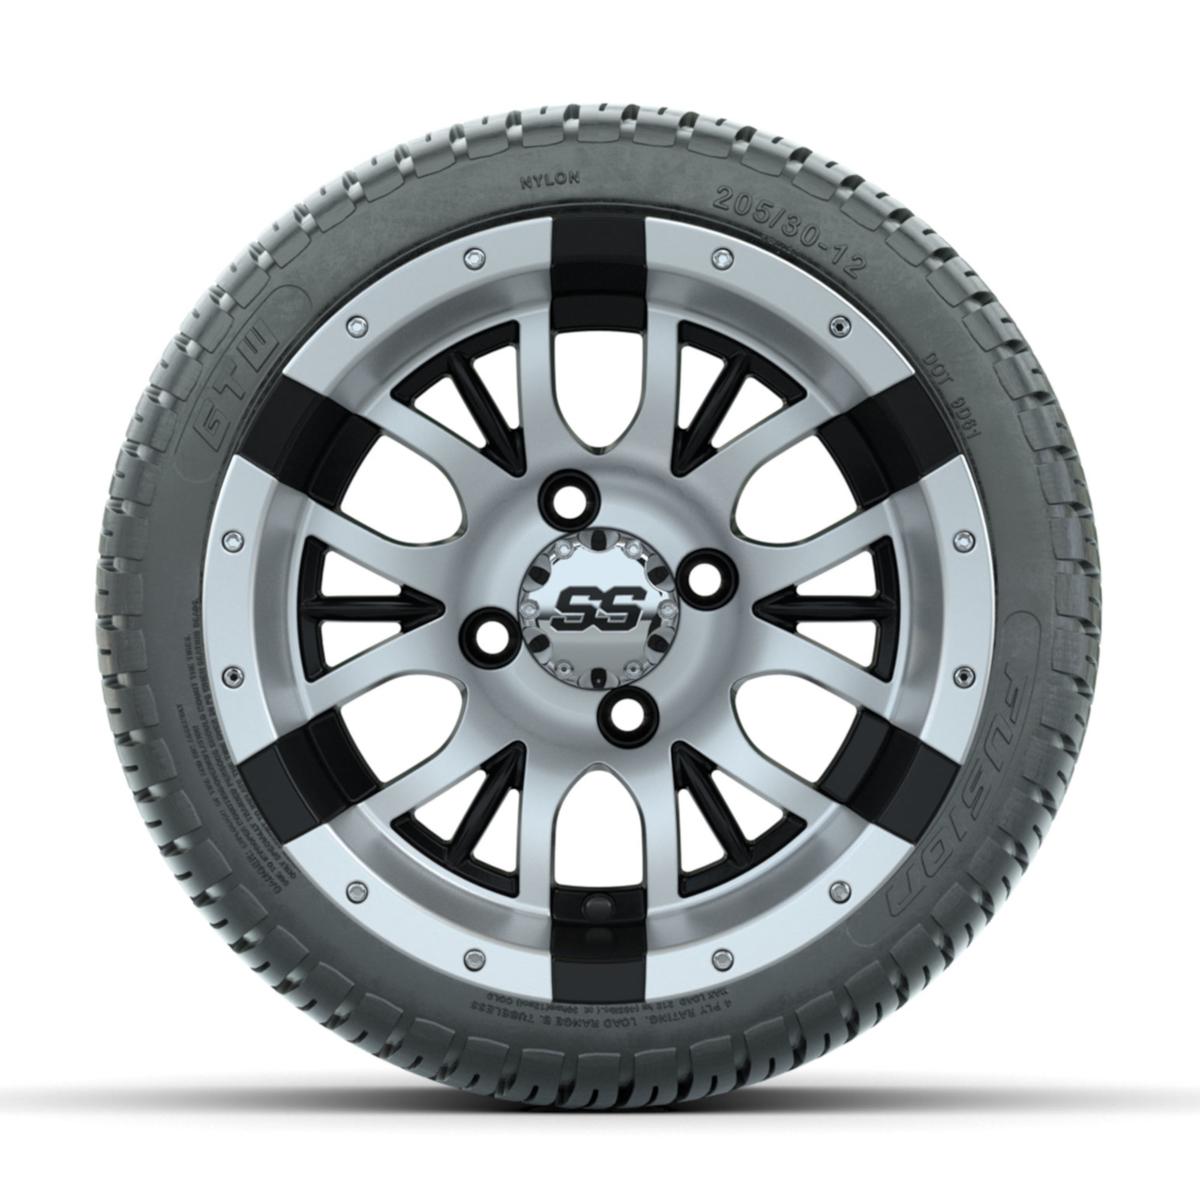 GTW Diesel Machined/Black 12 in Wheels with 205/30-12 Fusion Street Tires – Full Set